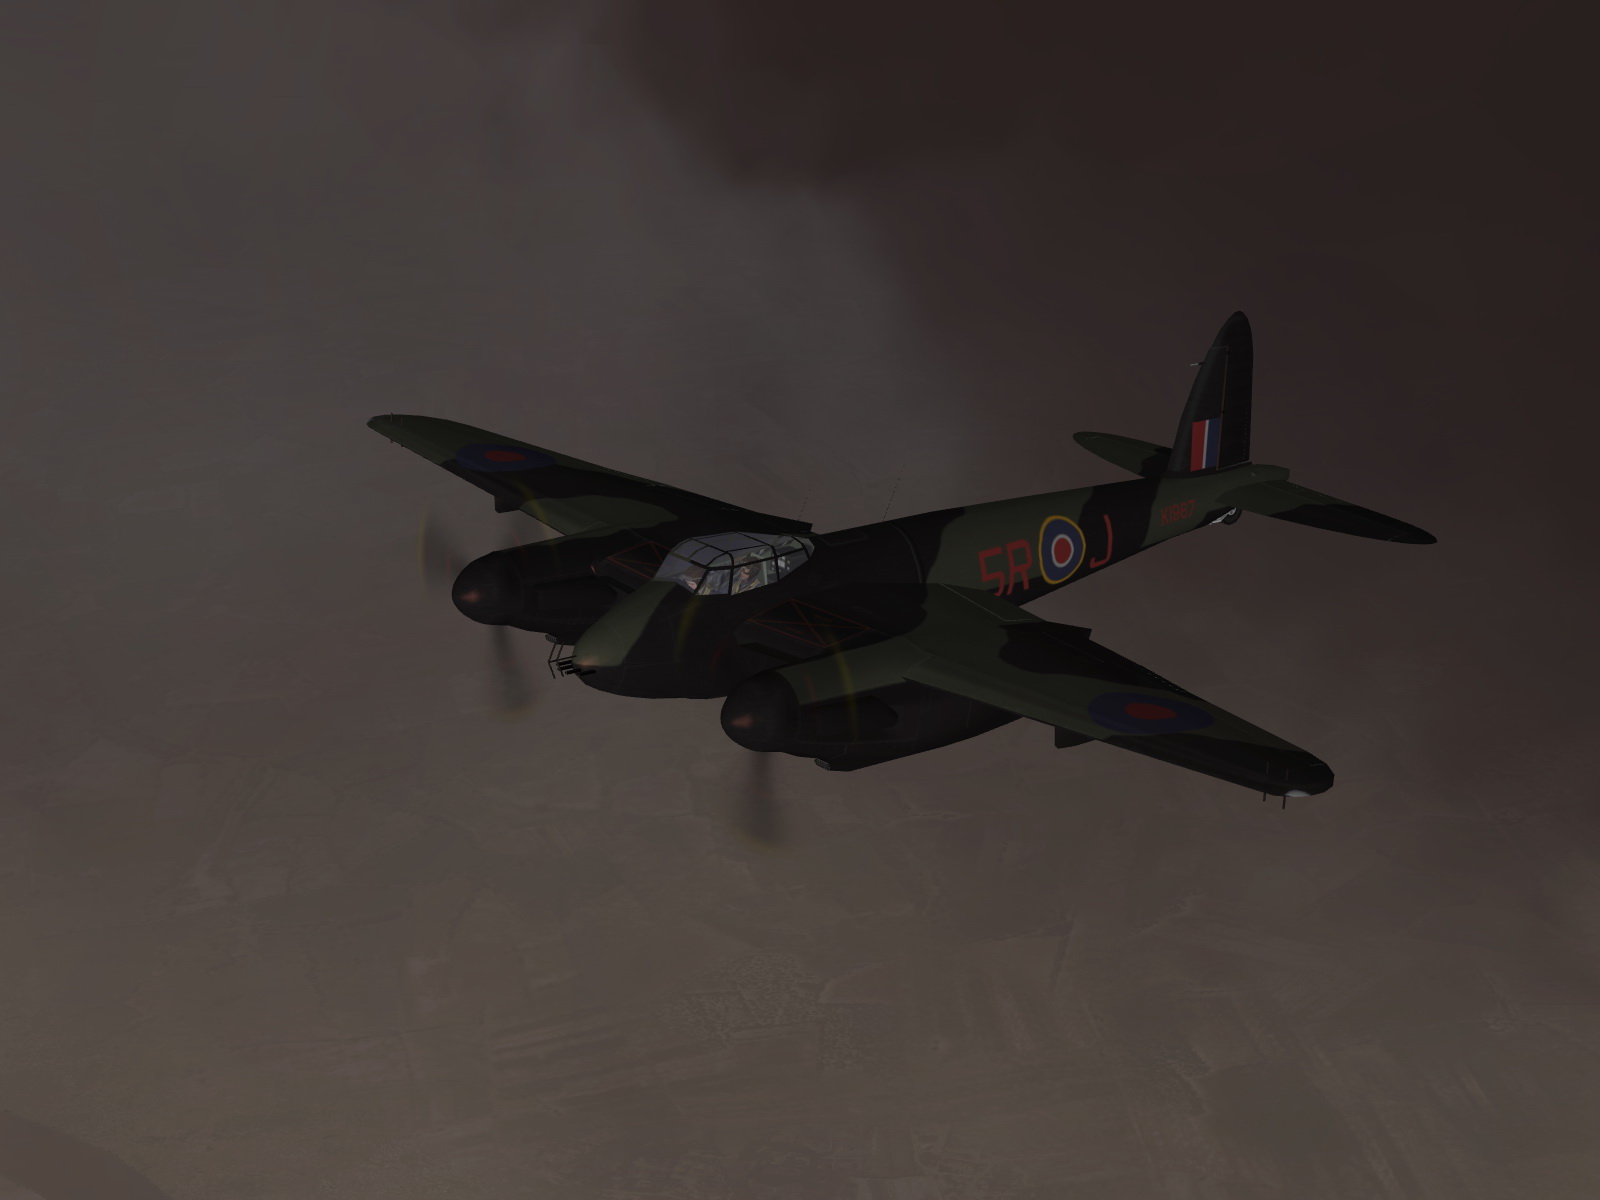 IL2 MH He 219A Nachtjager designed to cobat Mosquito nightfighters 01